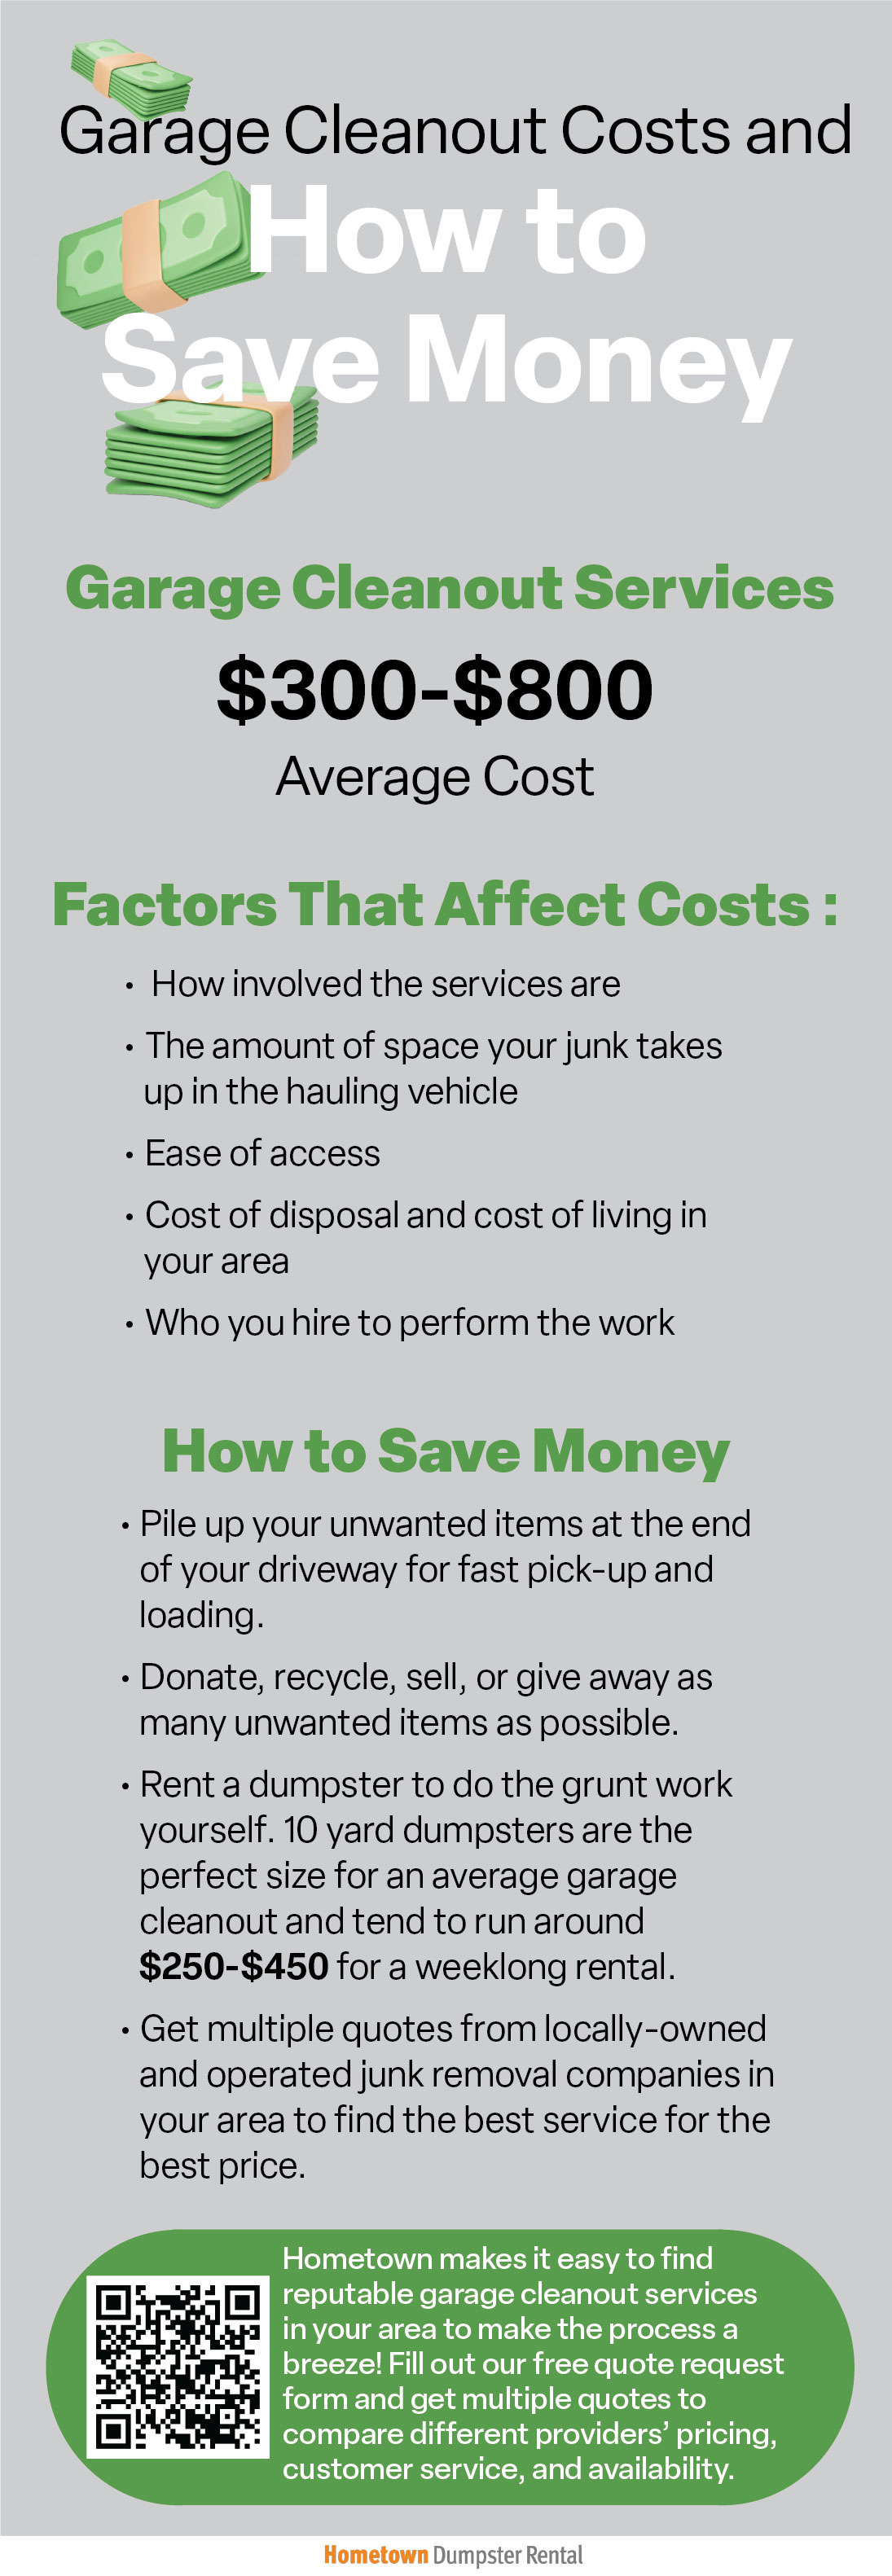 Garage Cleanout Costs and How to Save Money Infographic